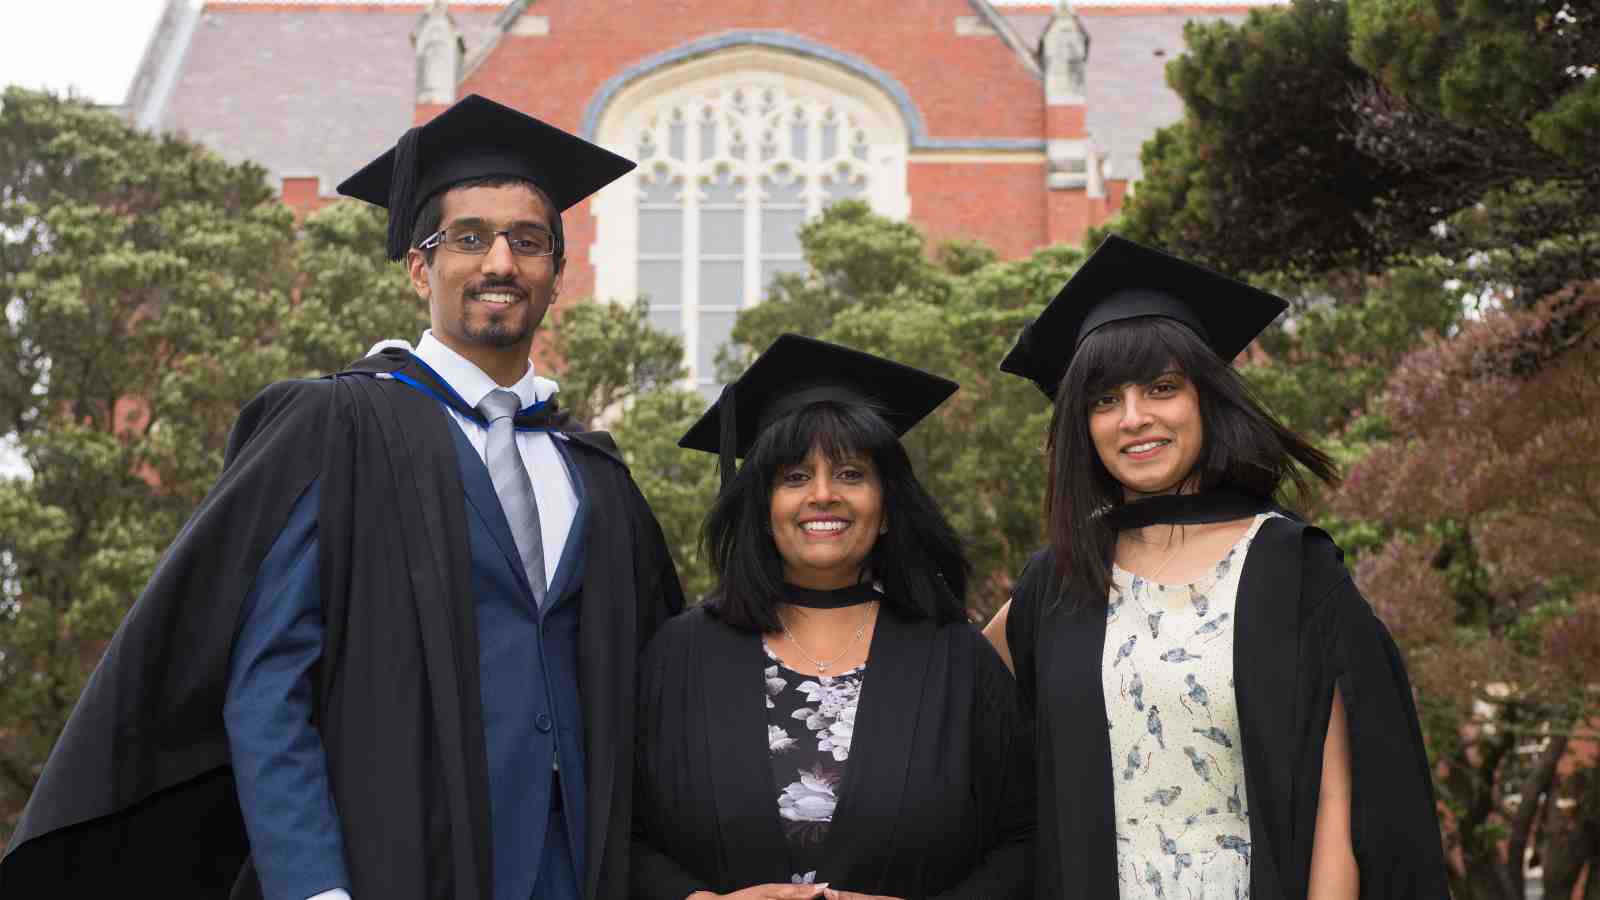 The Patel familty – Hansa Patel (middle) with two of her five children Jiten (left) and Jaini (right).